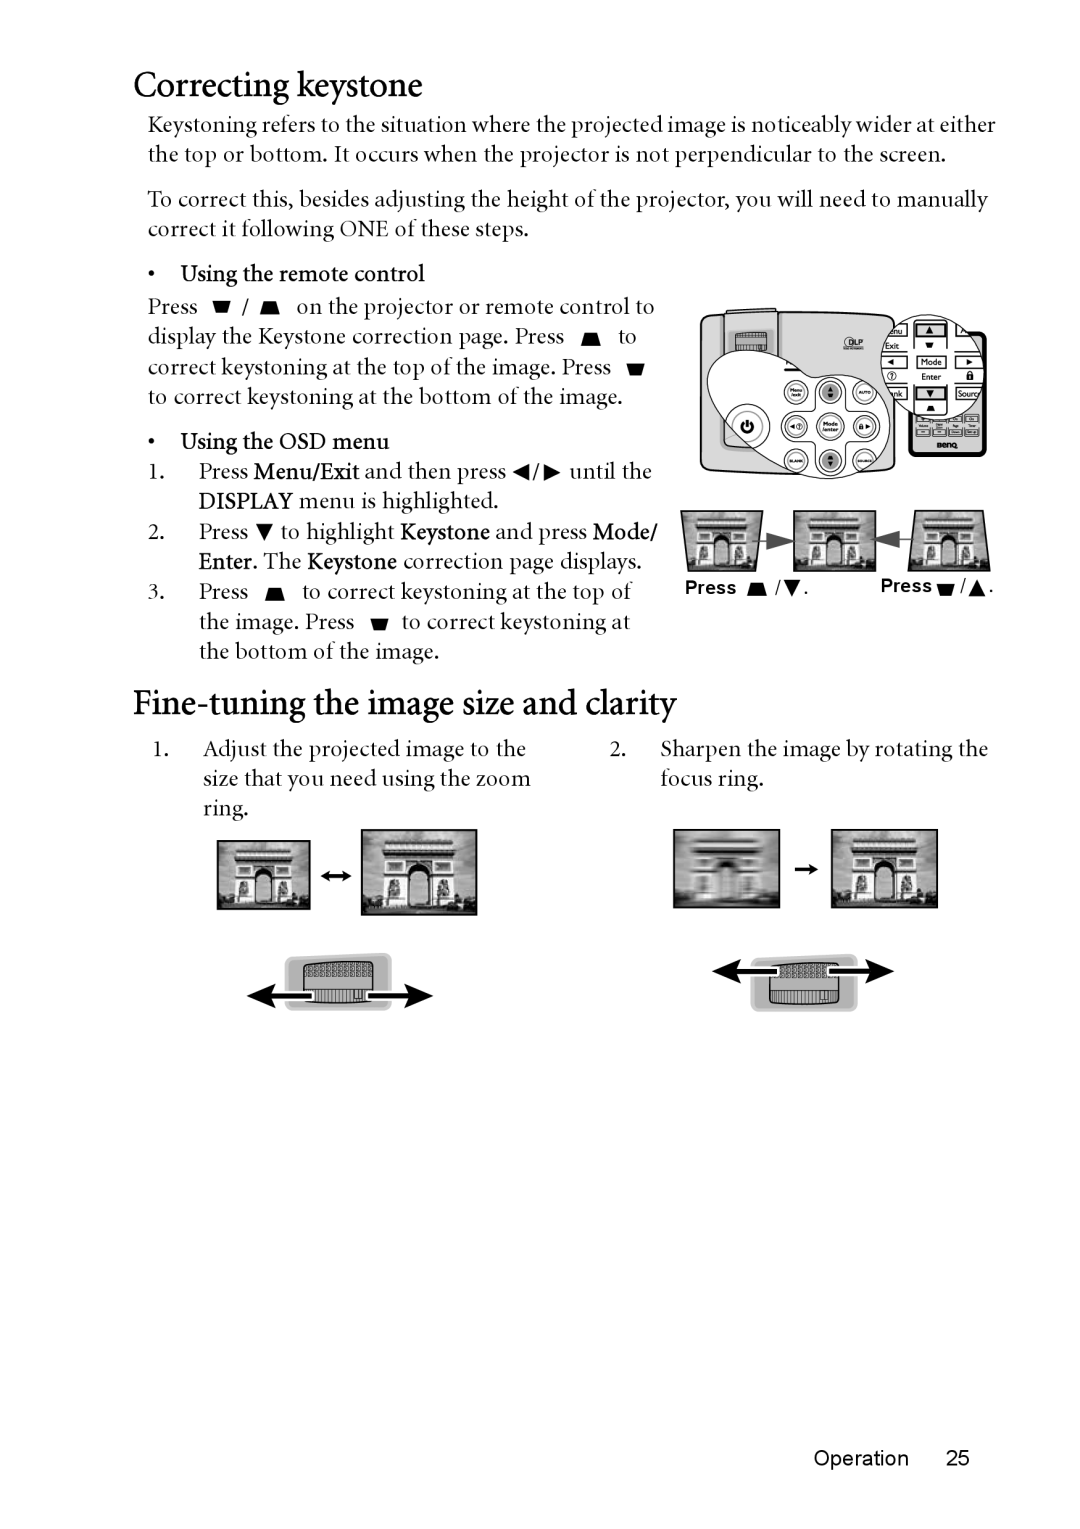 BenQ MP576, MP575, MP525, MP515, MP526 Correcting keystone, Fine-tuning the image size and clarity, Using the remote control 